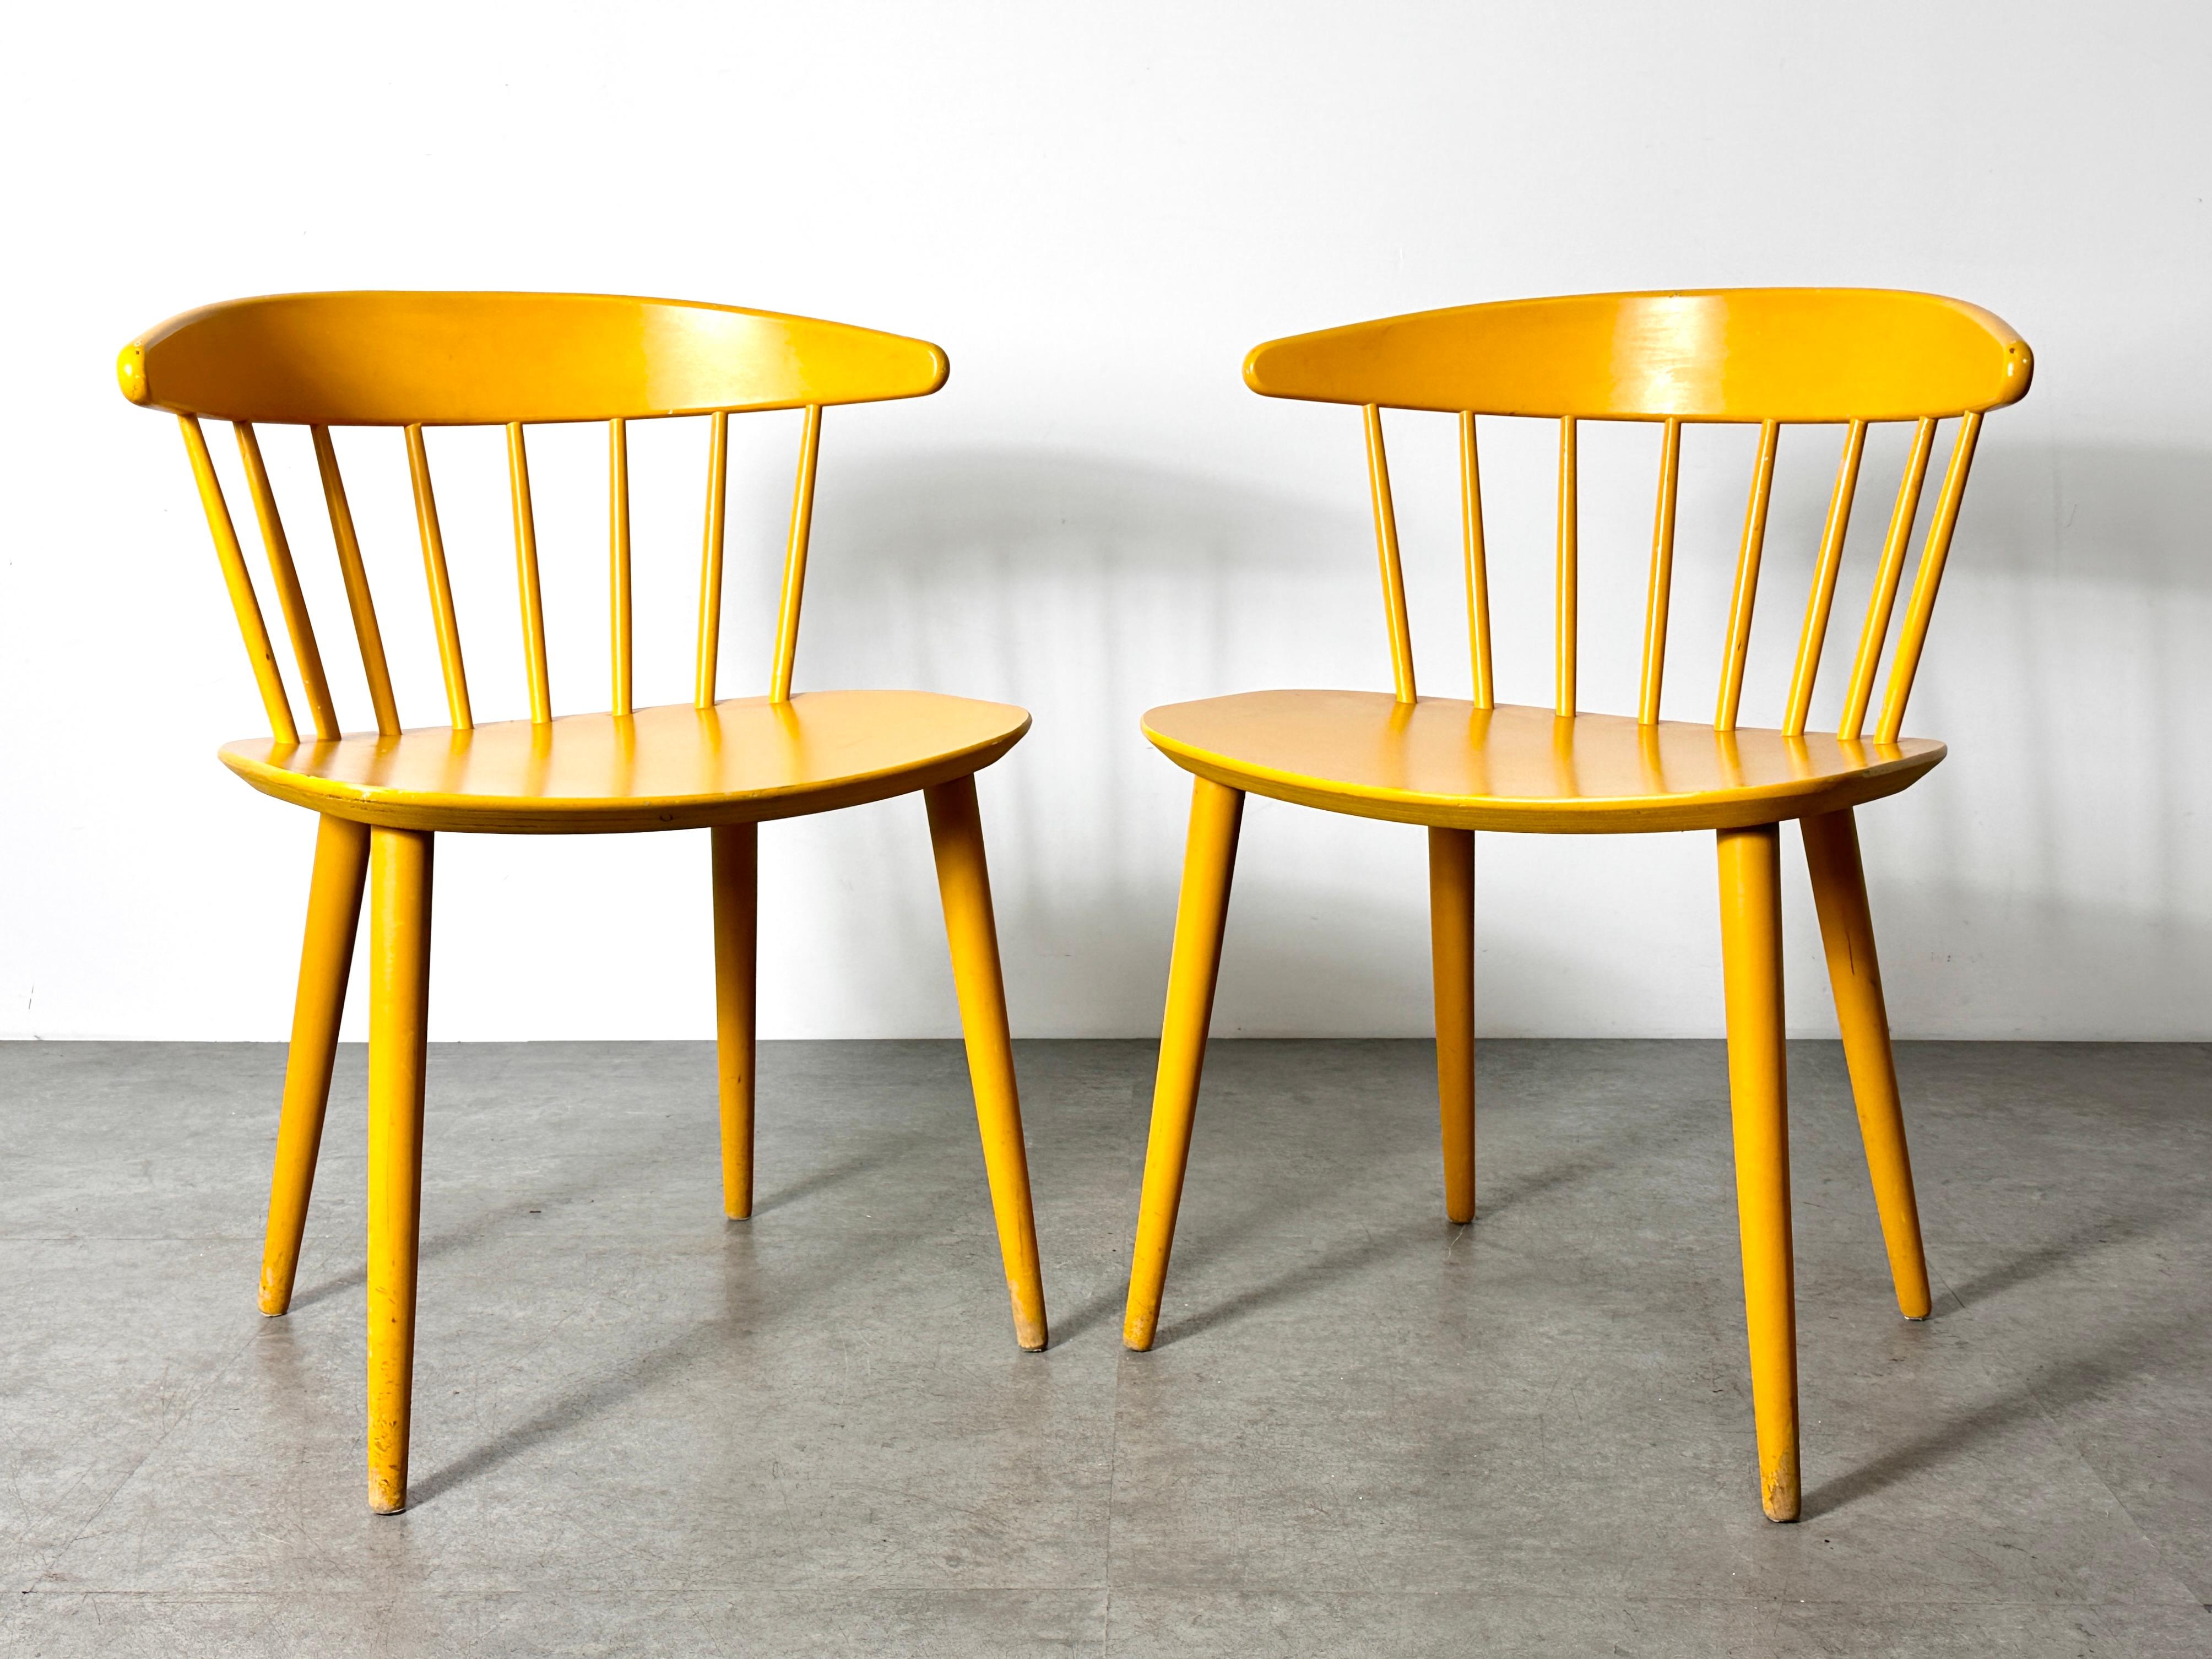 A pair of original model J104 chairs designed by Jorgen Baekmark for FDB Mobler 1960s
Solid wood in uncommon original yellow finish
Signed with manufacturer impressed mark to underside